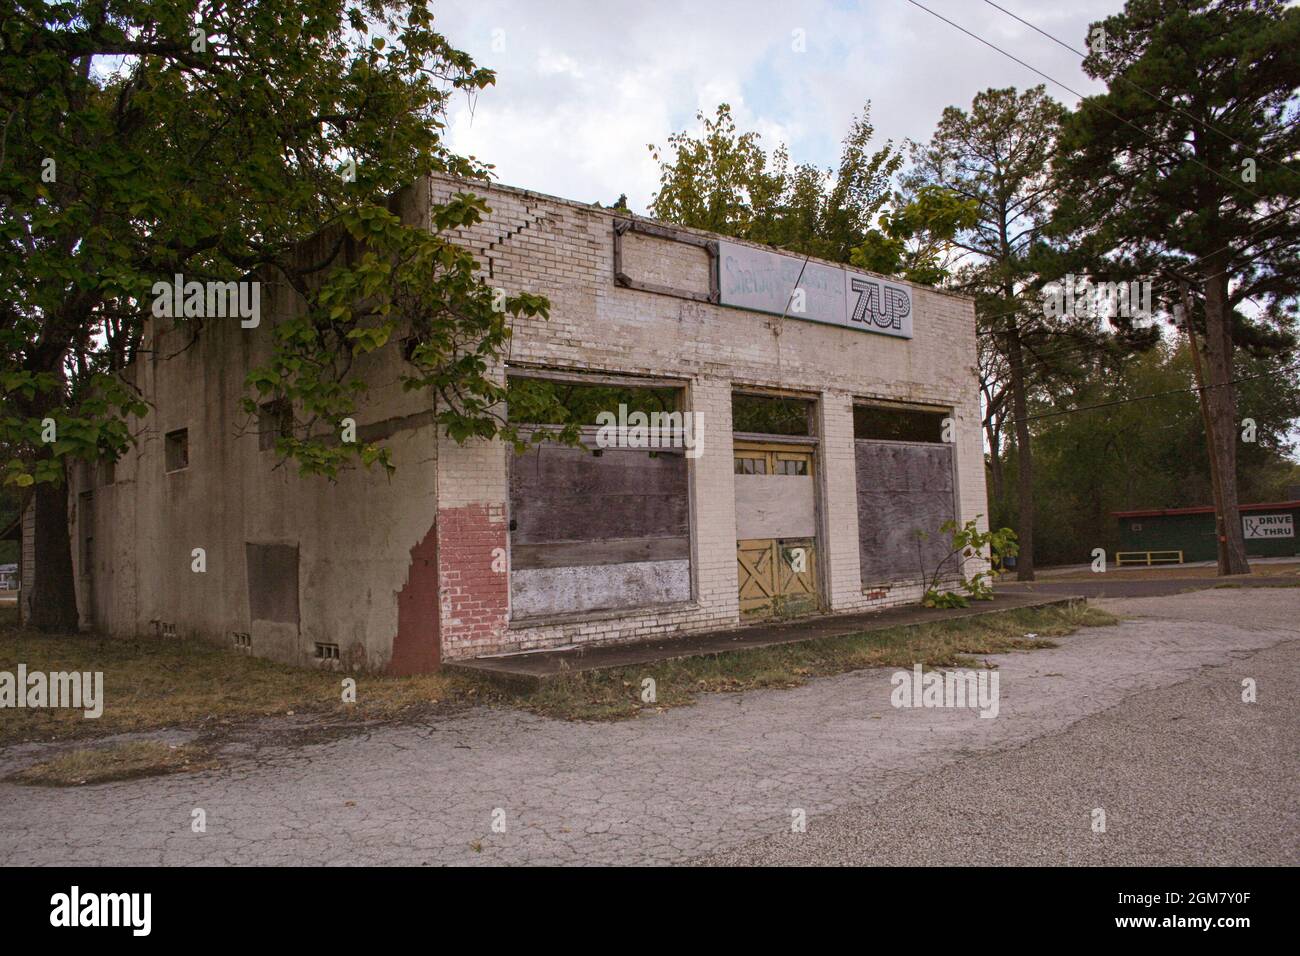 Tyler, TX: Abandoned local grocery store on a cloudy day in Tyler, TX Stock Photo